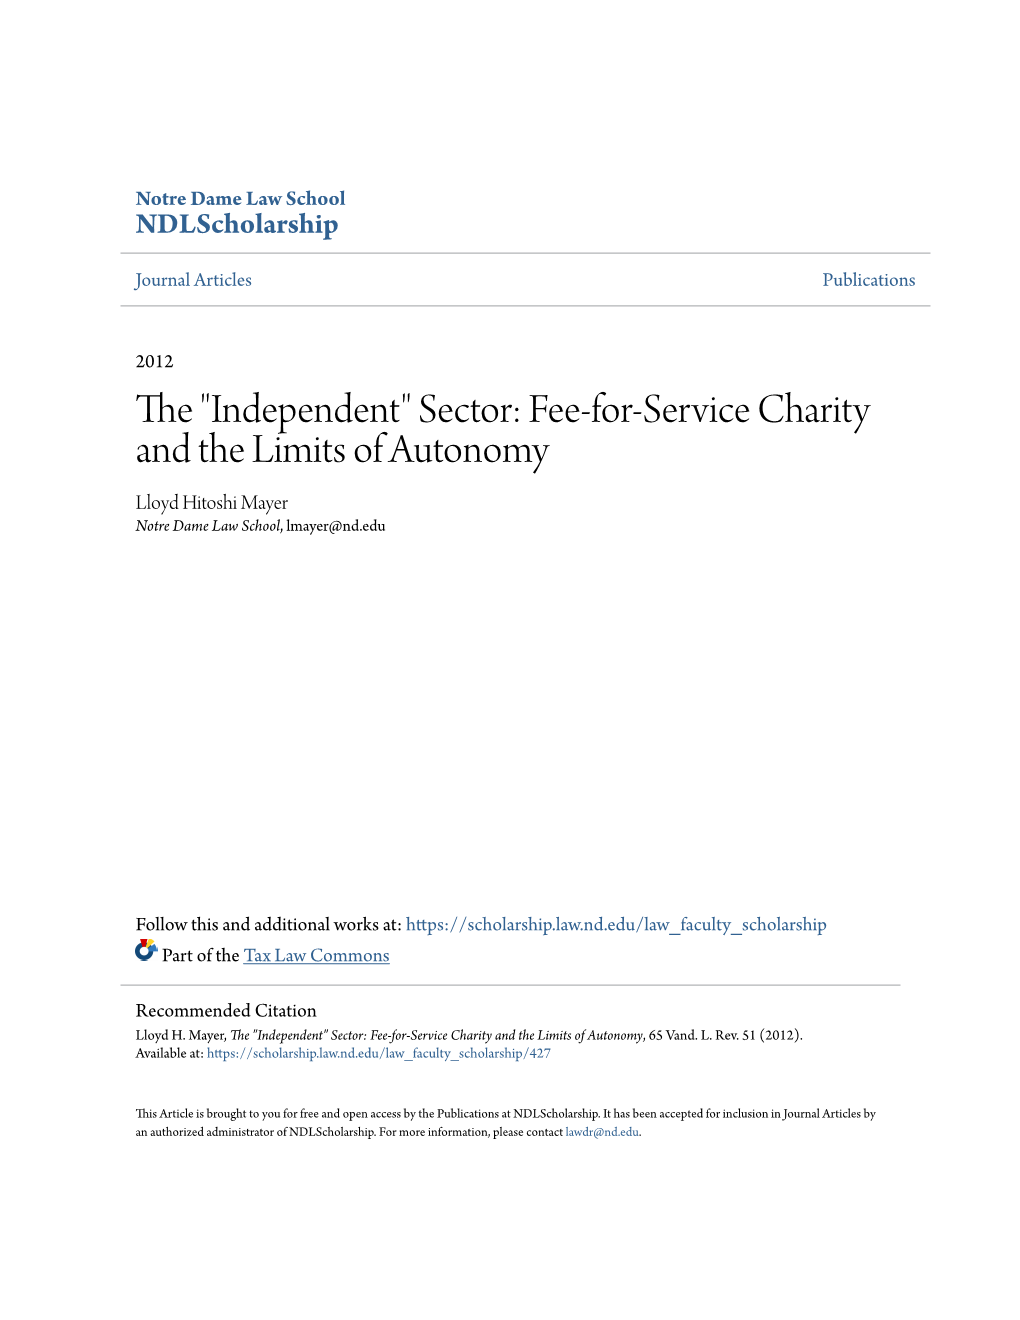 The "Independent" Sector: Fee-For-Service Charity and the Limits of Autonomy Lloyd Hitoshi Mayer Notre Dame Law School, Lmayer@Nd.Edu